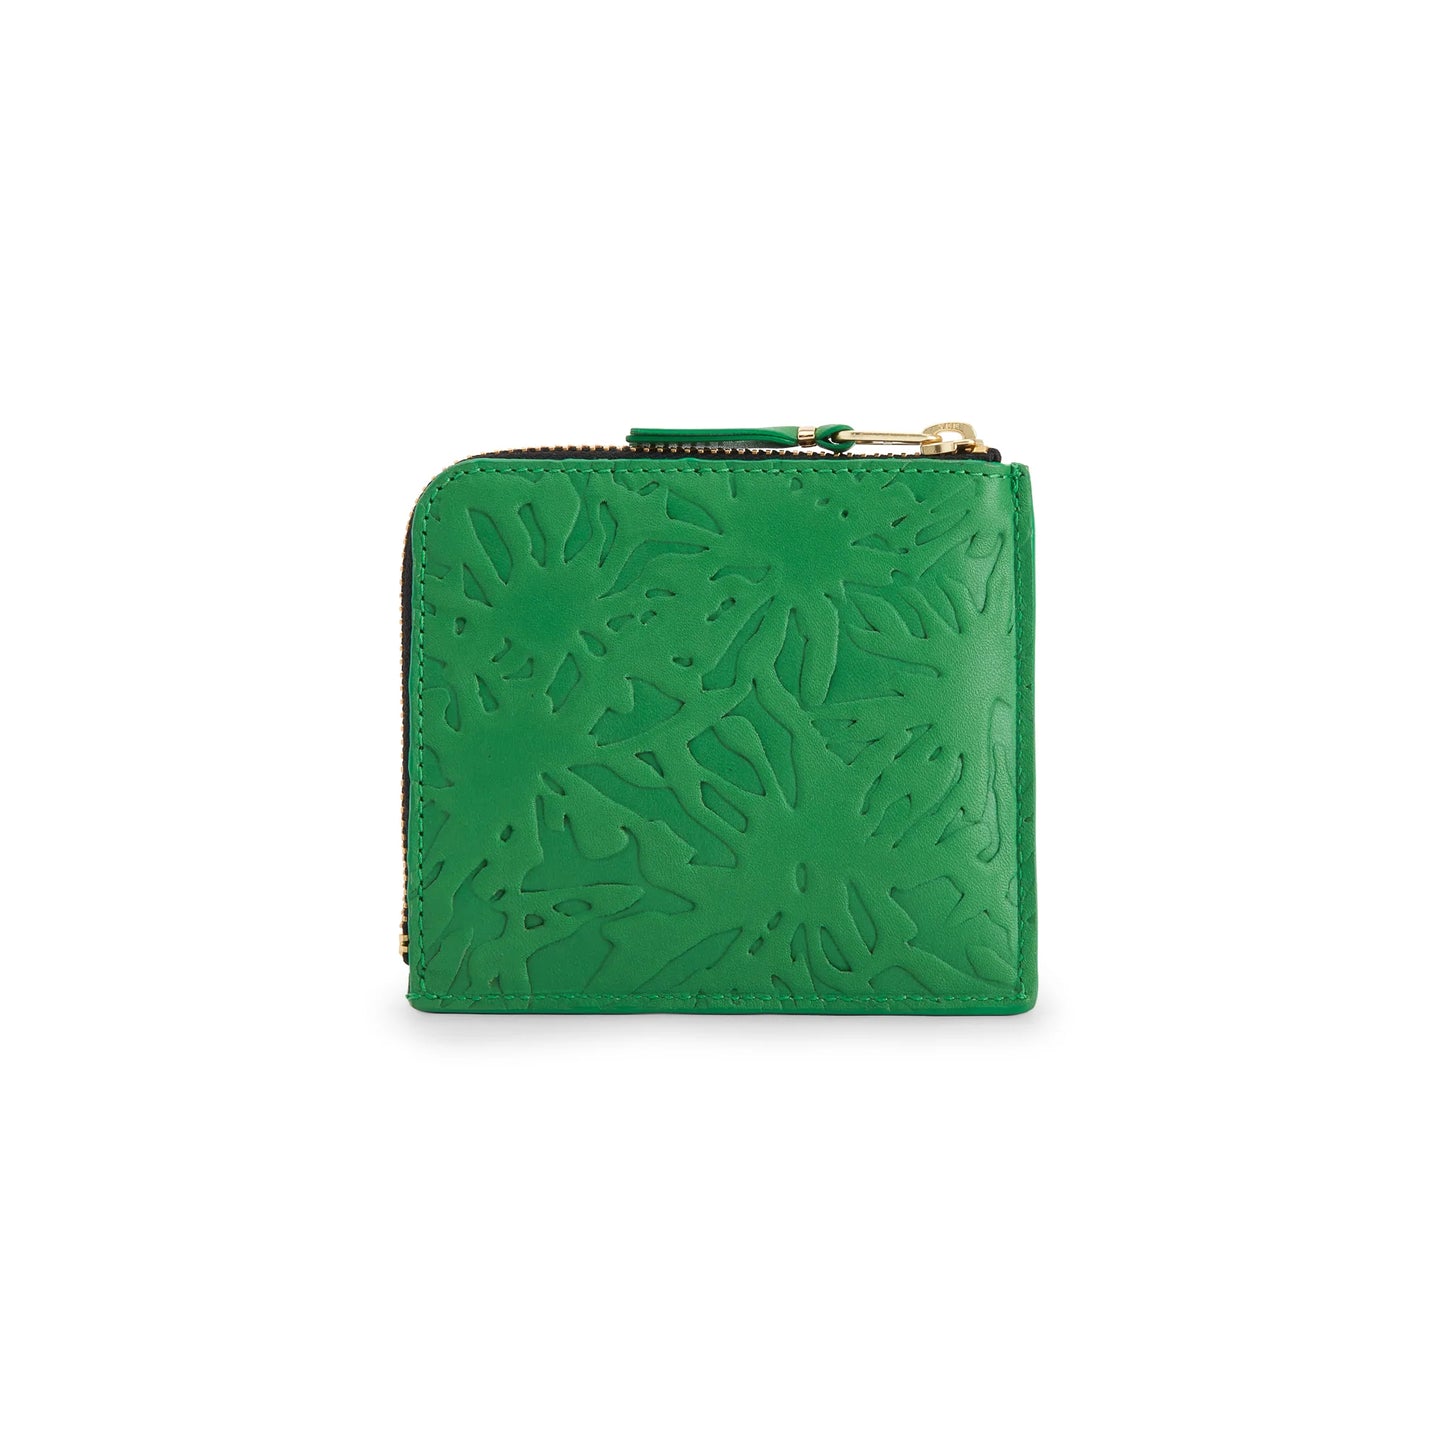 Embossed forest leather wallet in green